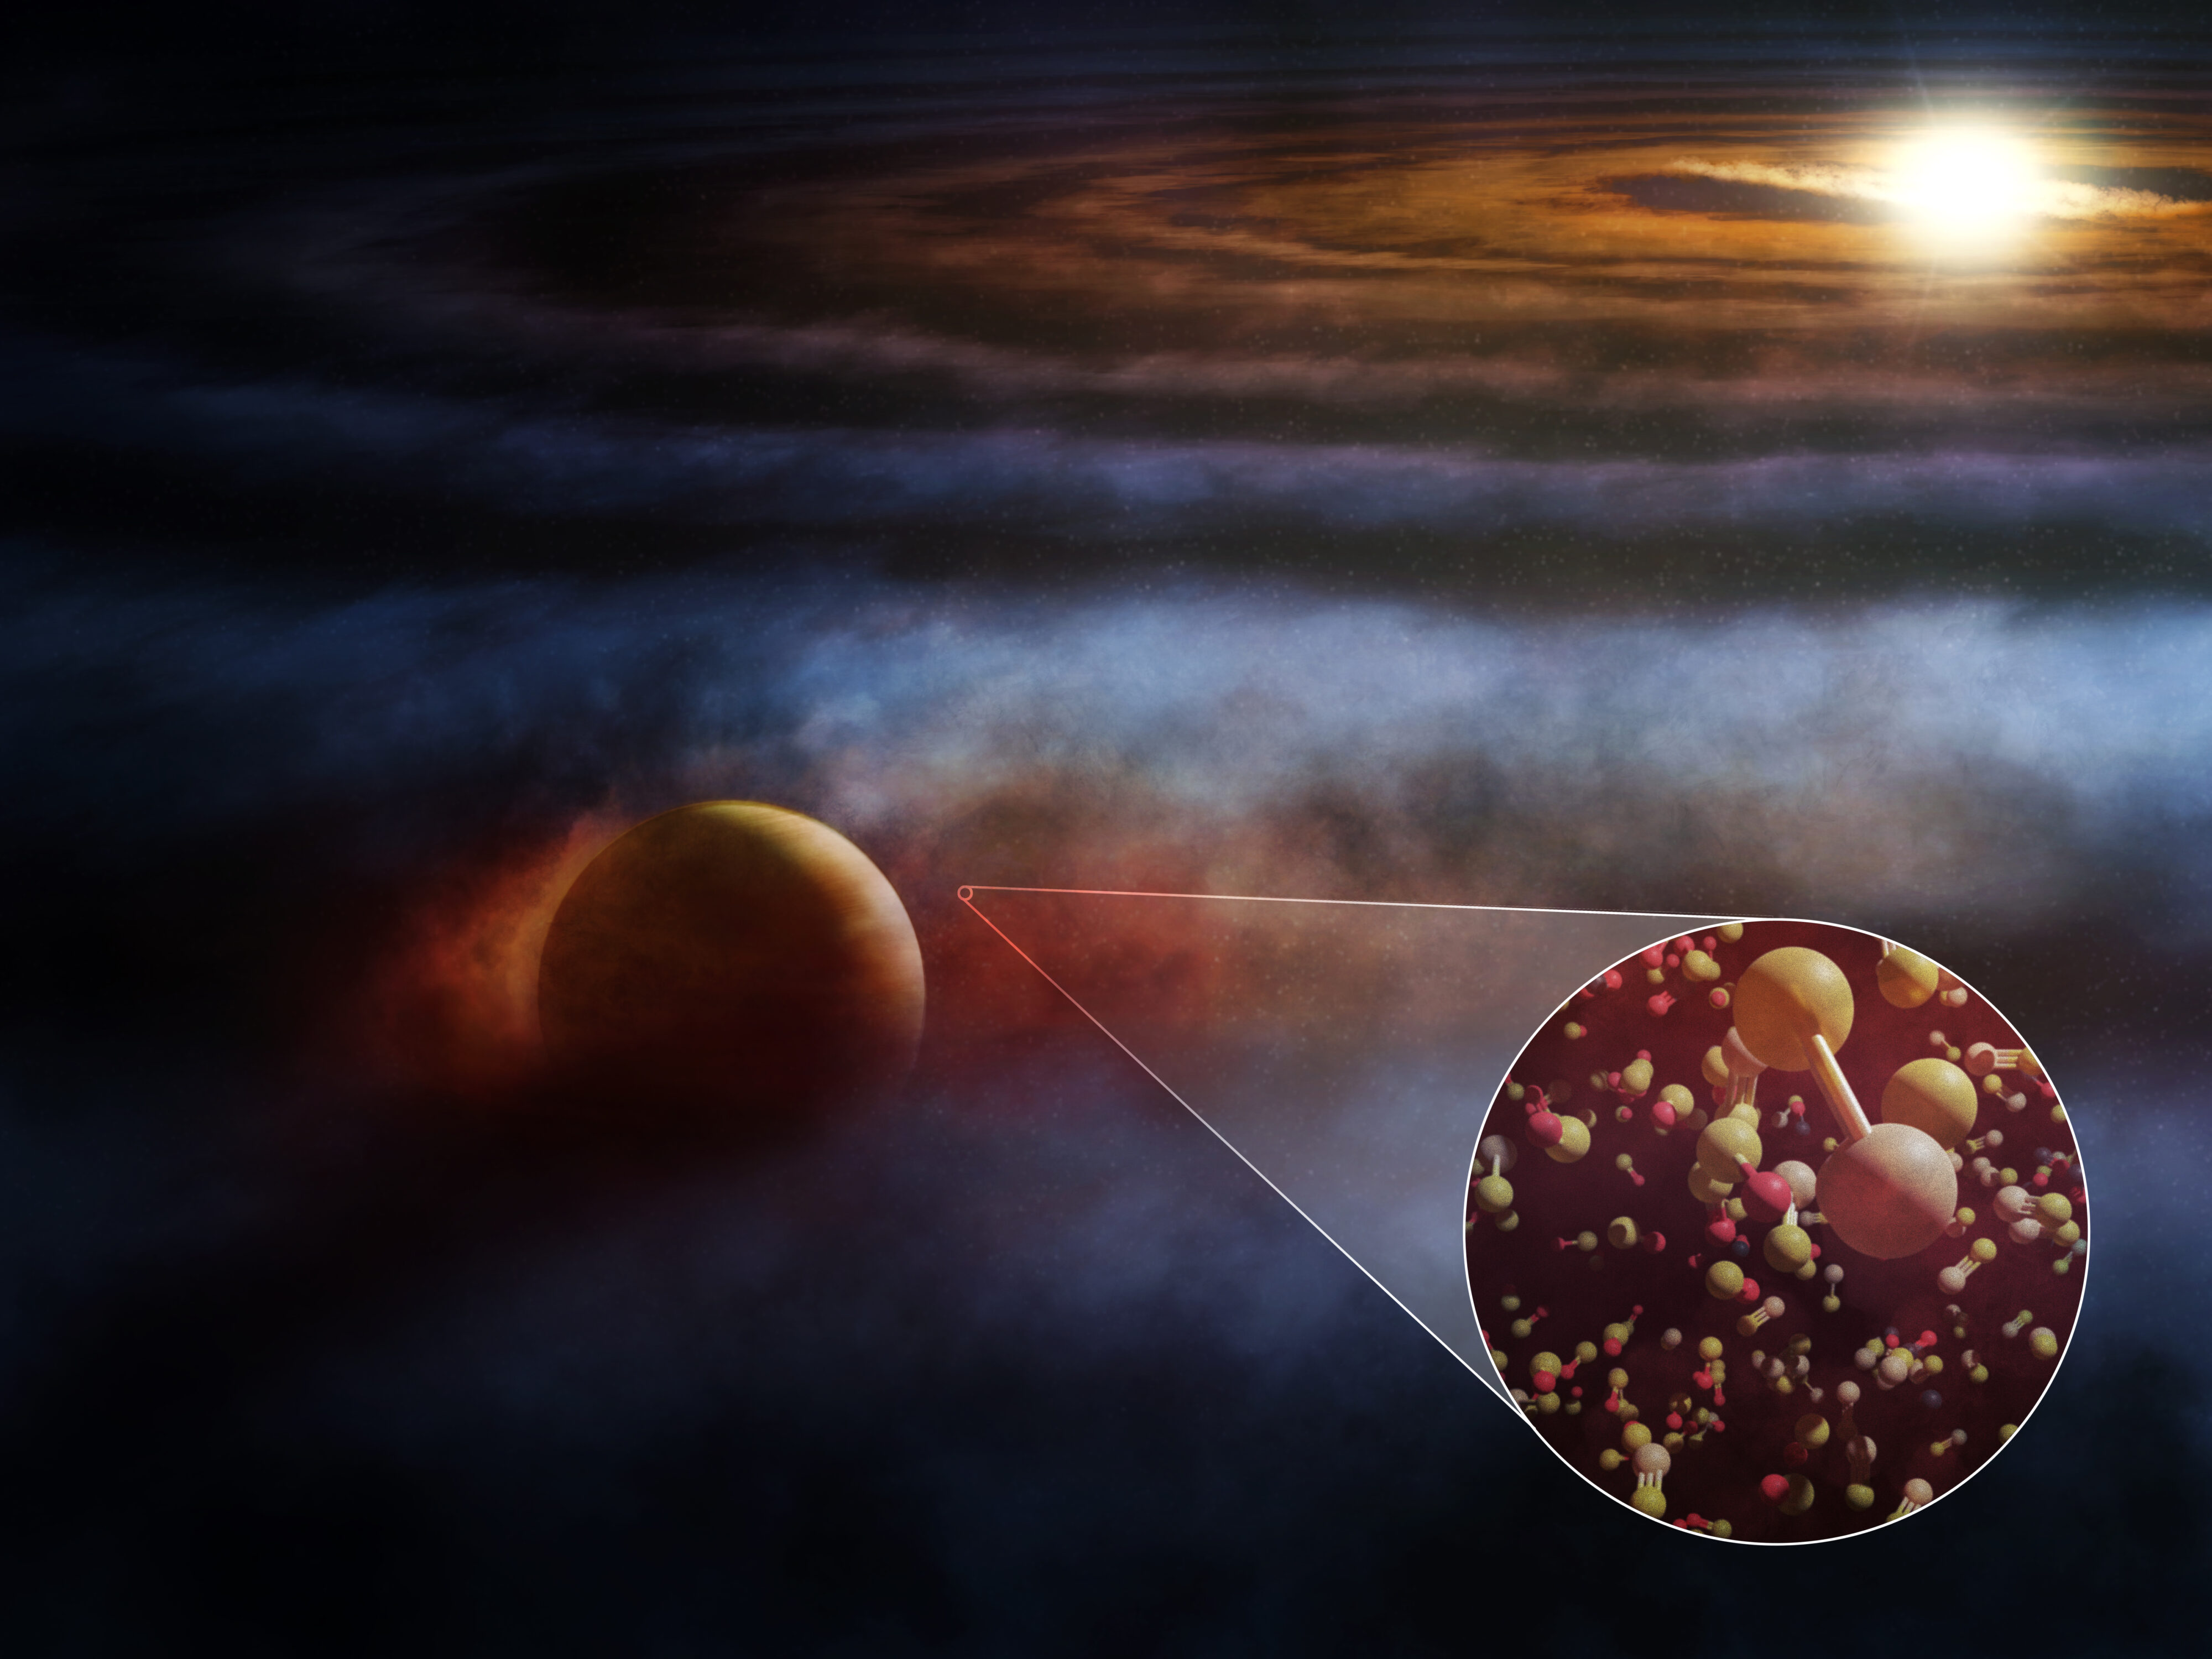 Located in the constellation Sagittarius, the young star HD 169142 is host to a giant protoplanet embedded within its dusty, gas-rich protoplanetary disk. This artist’s conception shows the Jupiter-like planet interacting with and heating nearby molecular gas, driving outflows seen in several emission lines, including those from shock-tracing molecules like SO and SiS, and the commonly seen 12CO and 13CO. [Not to scale] Credit: ALMA (ESO/NAOJ/NRAO), M. Weiss (NRAO/AUI/NSF)